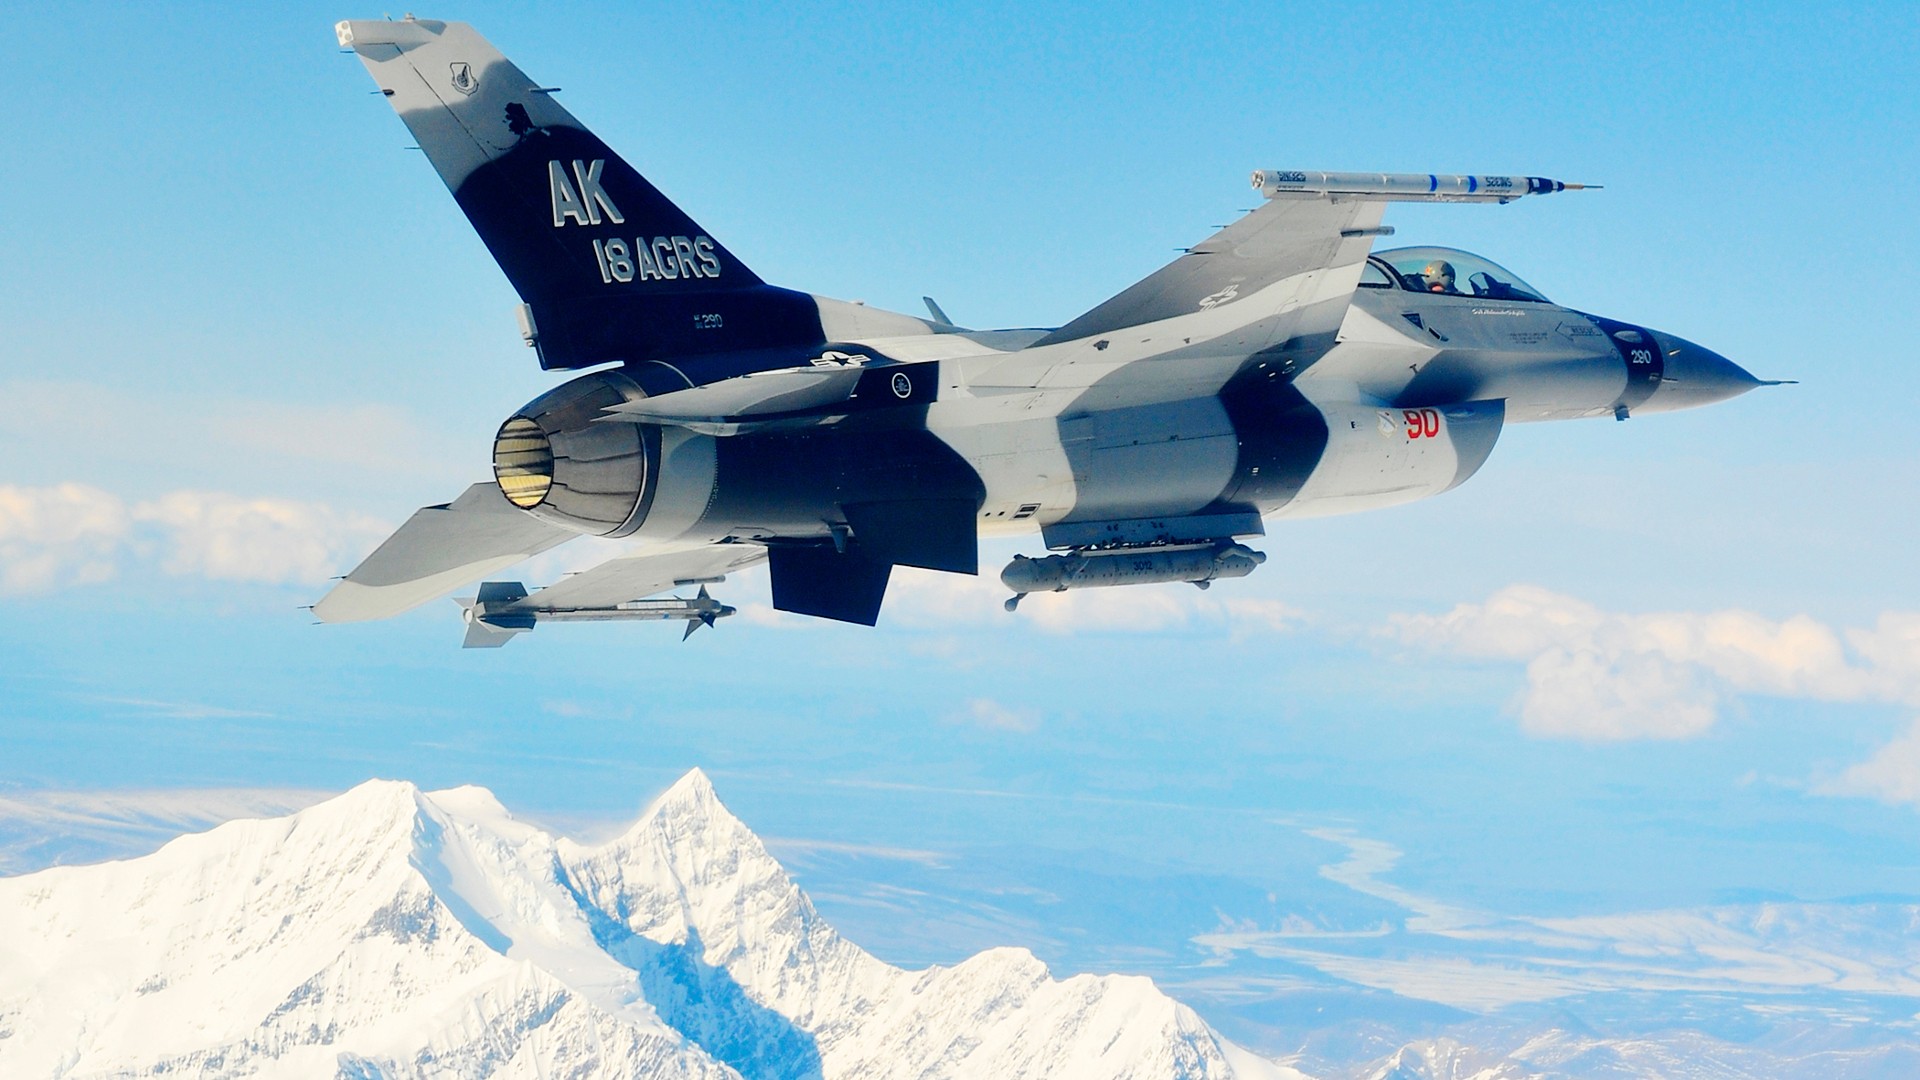 General 1920x1080 military aircraft military aircraft airplane jet fighter US Air Force General Dynamics F-16 Fighting Falcon snowy peak military vehicle American aircraft vehicle Alaska camouflage pilot helmet clouds flying sky snow